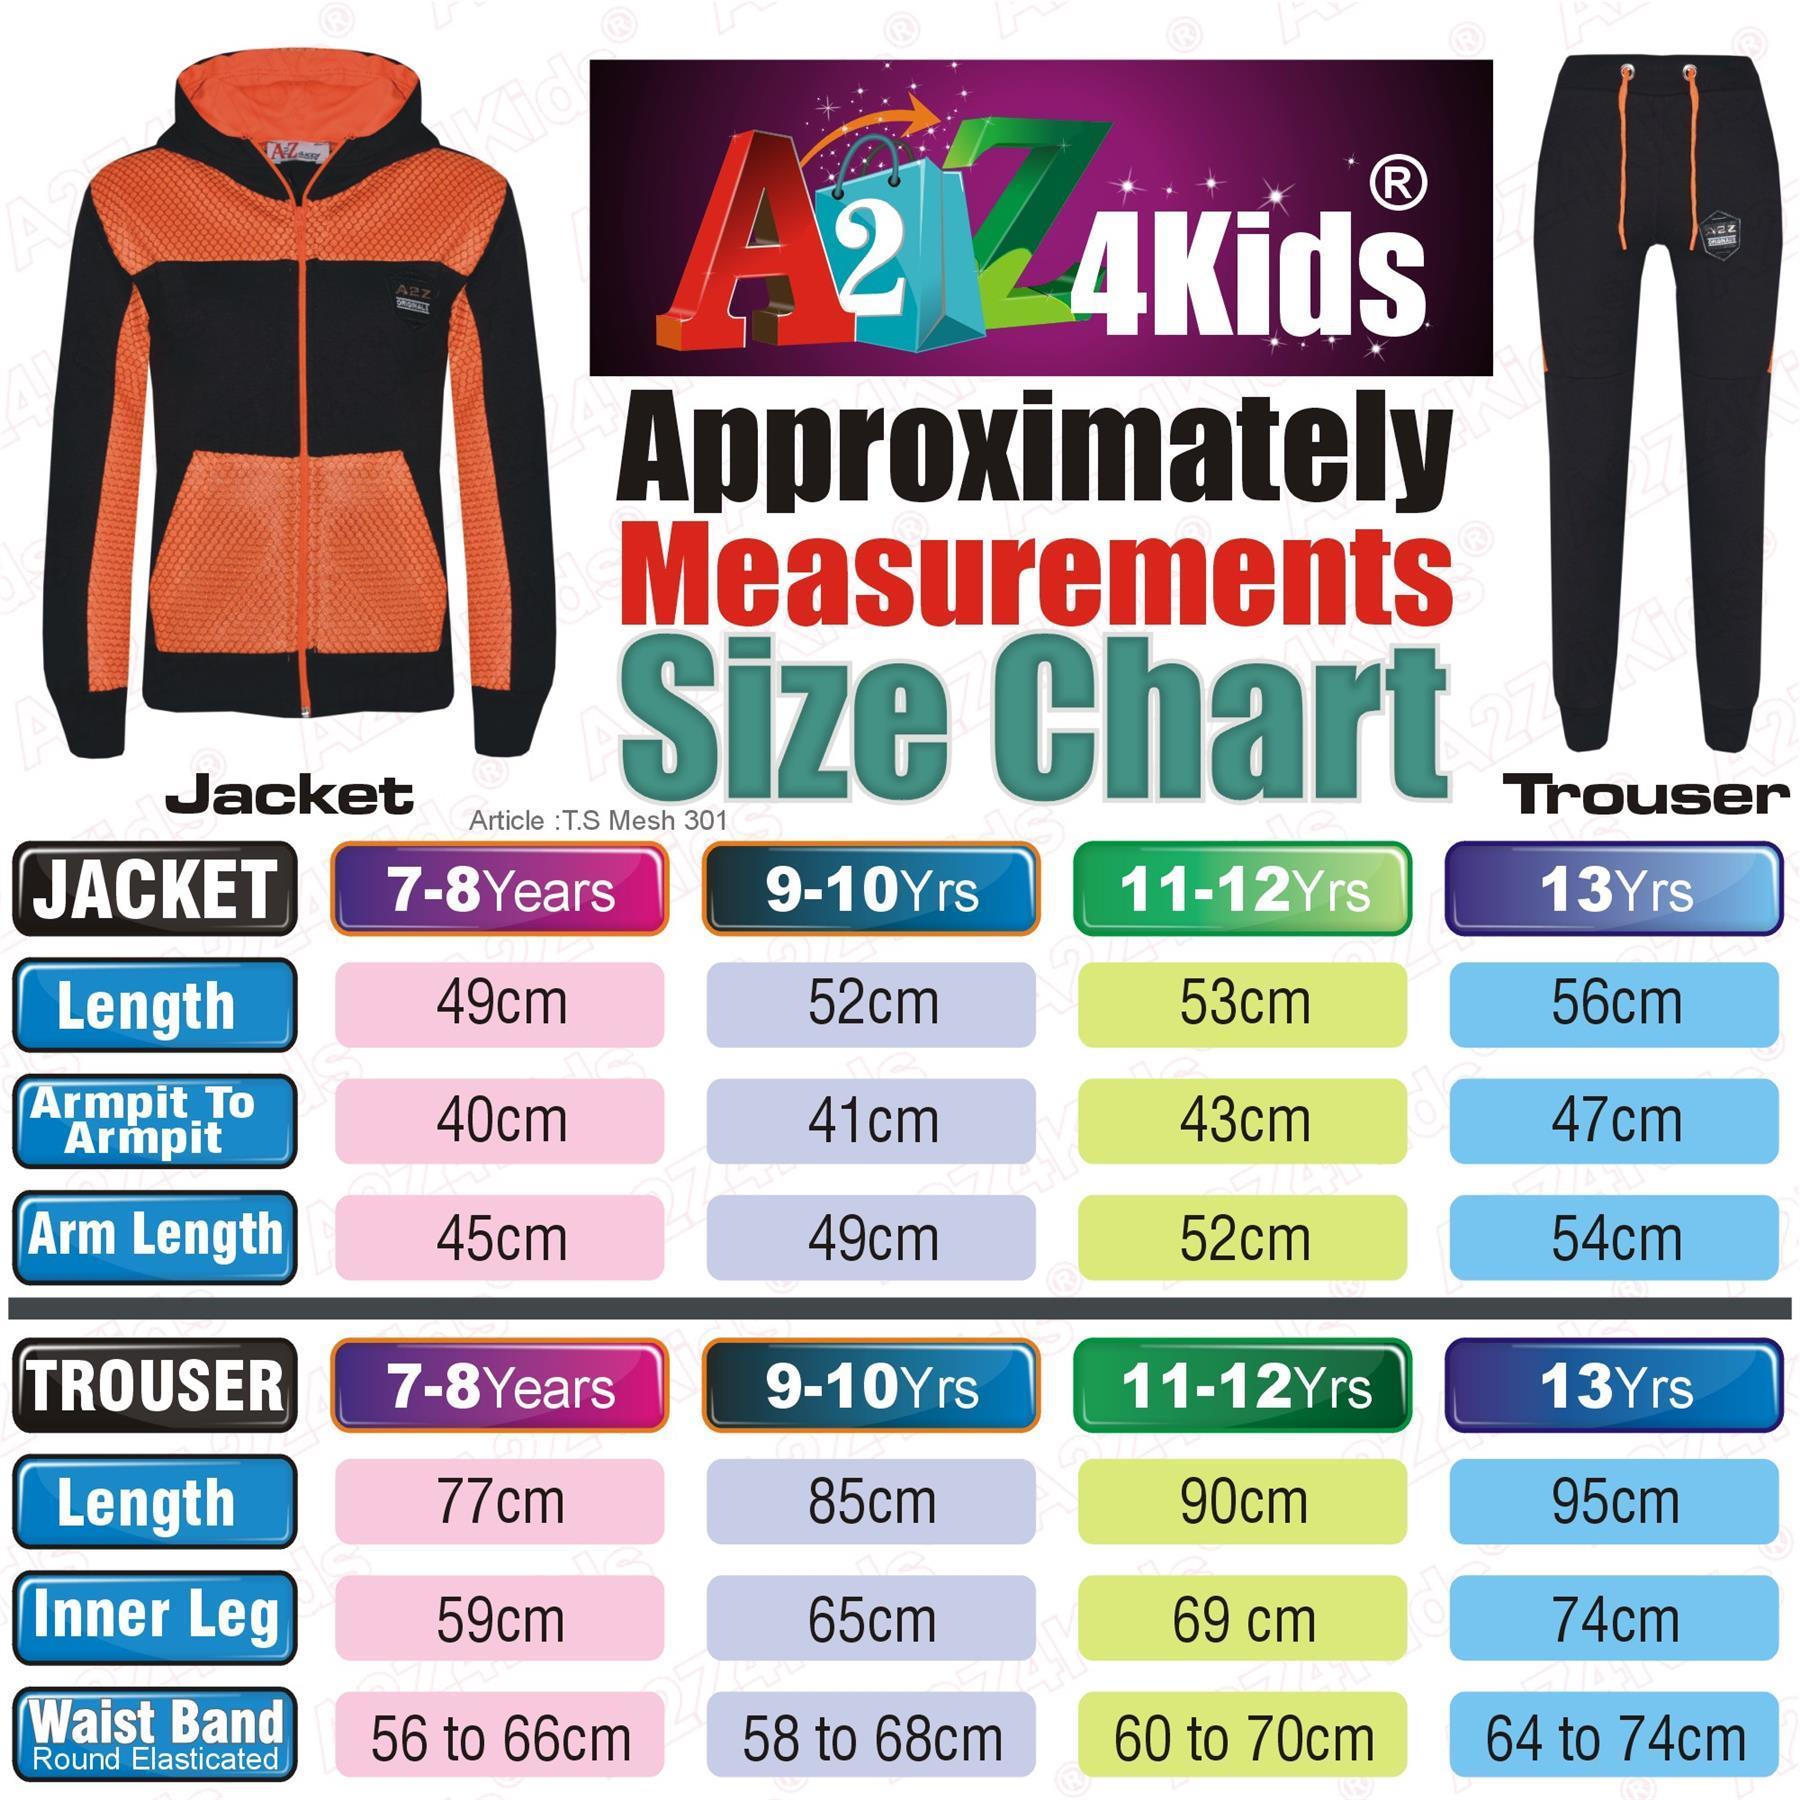 Boys Girls Tracksuit A2Z Project Fashion Mesh Panels Hoodie & Joggers